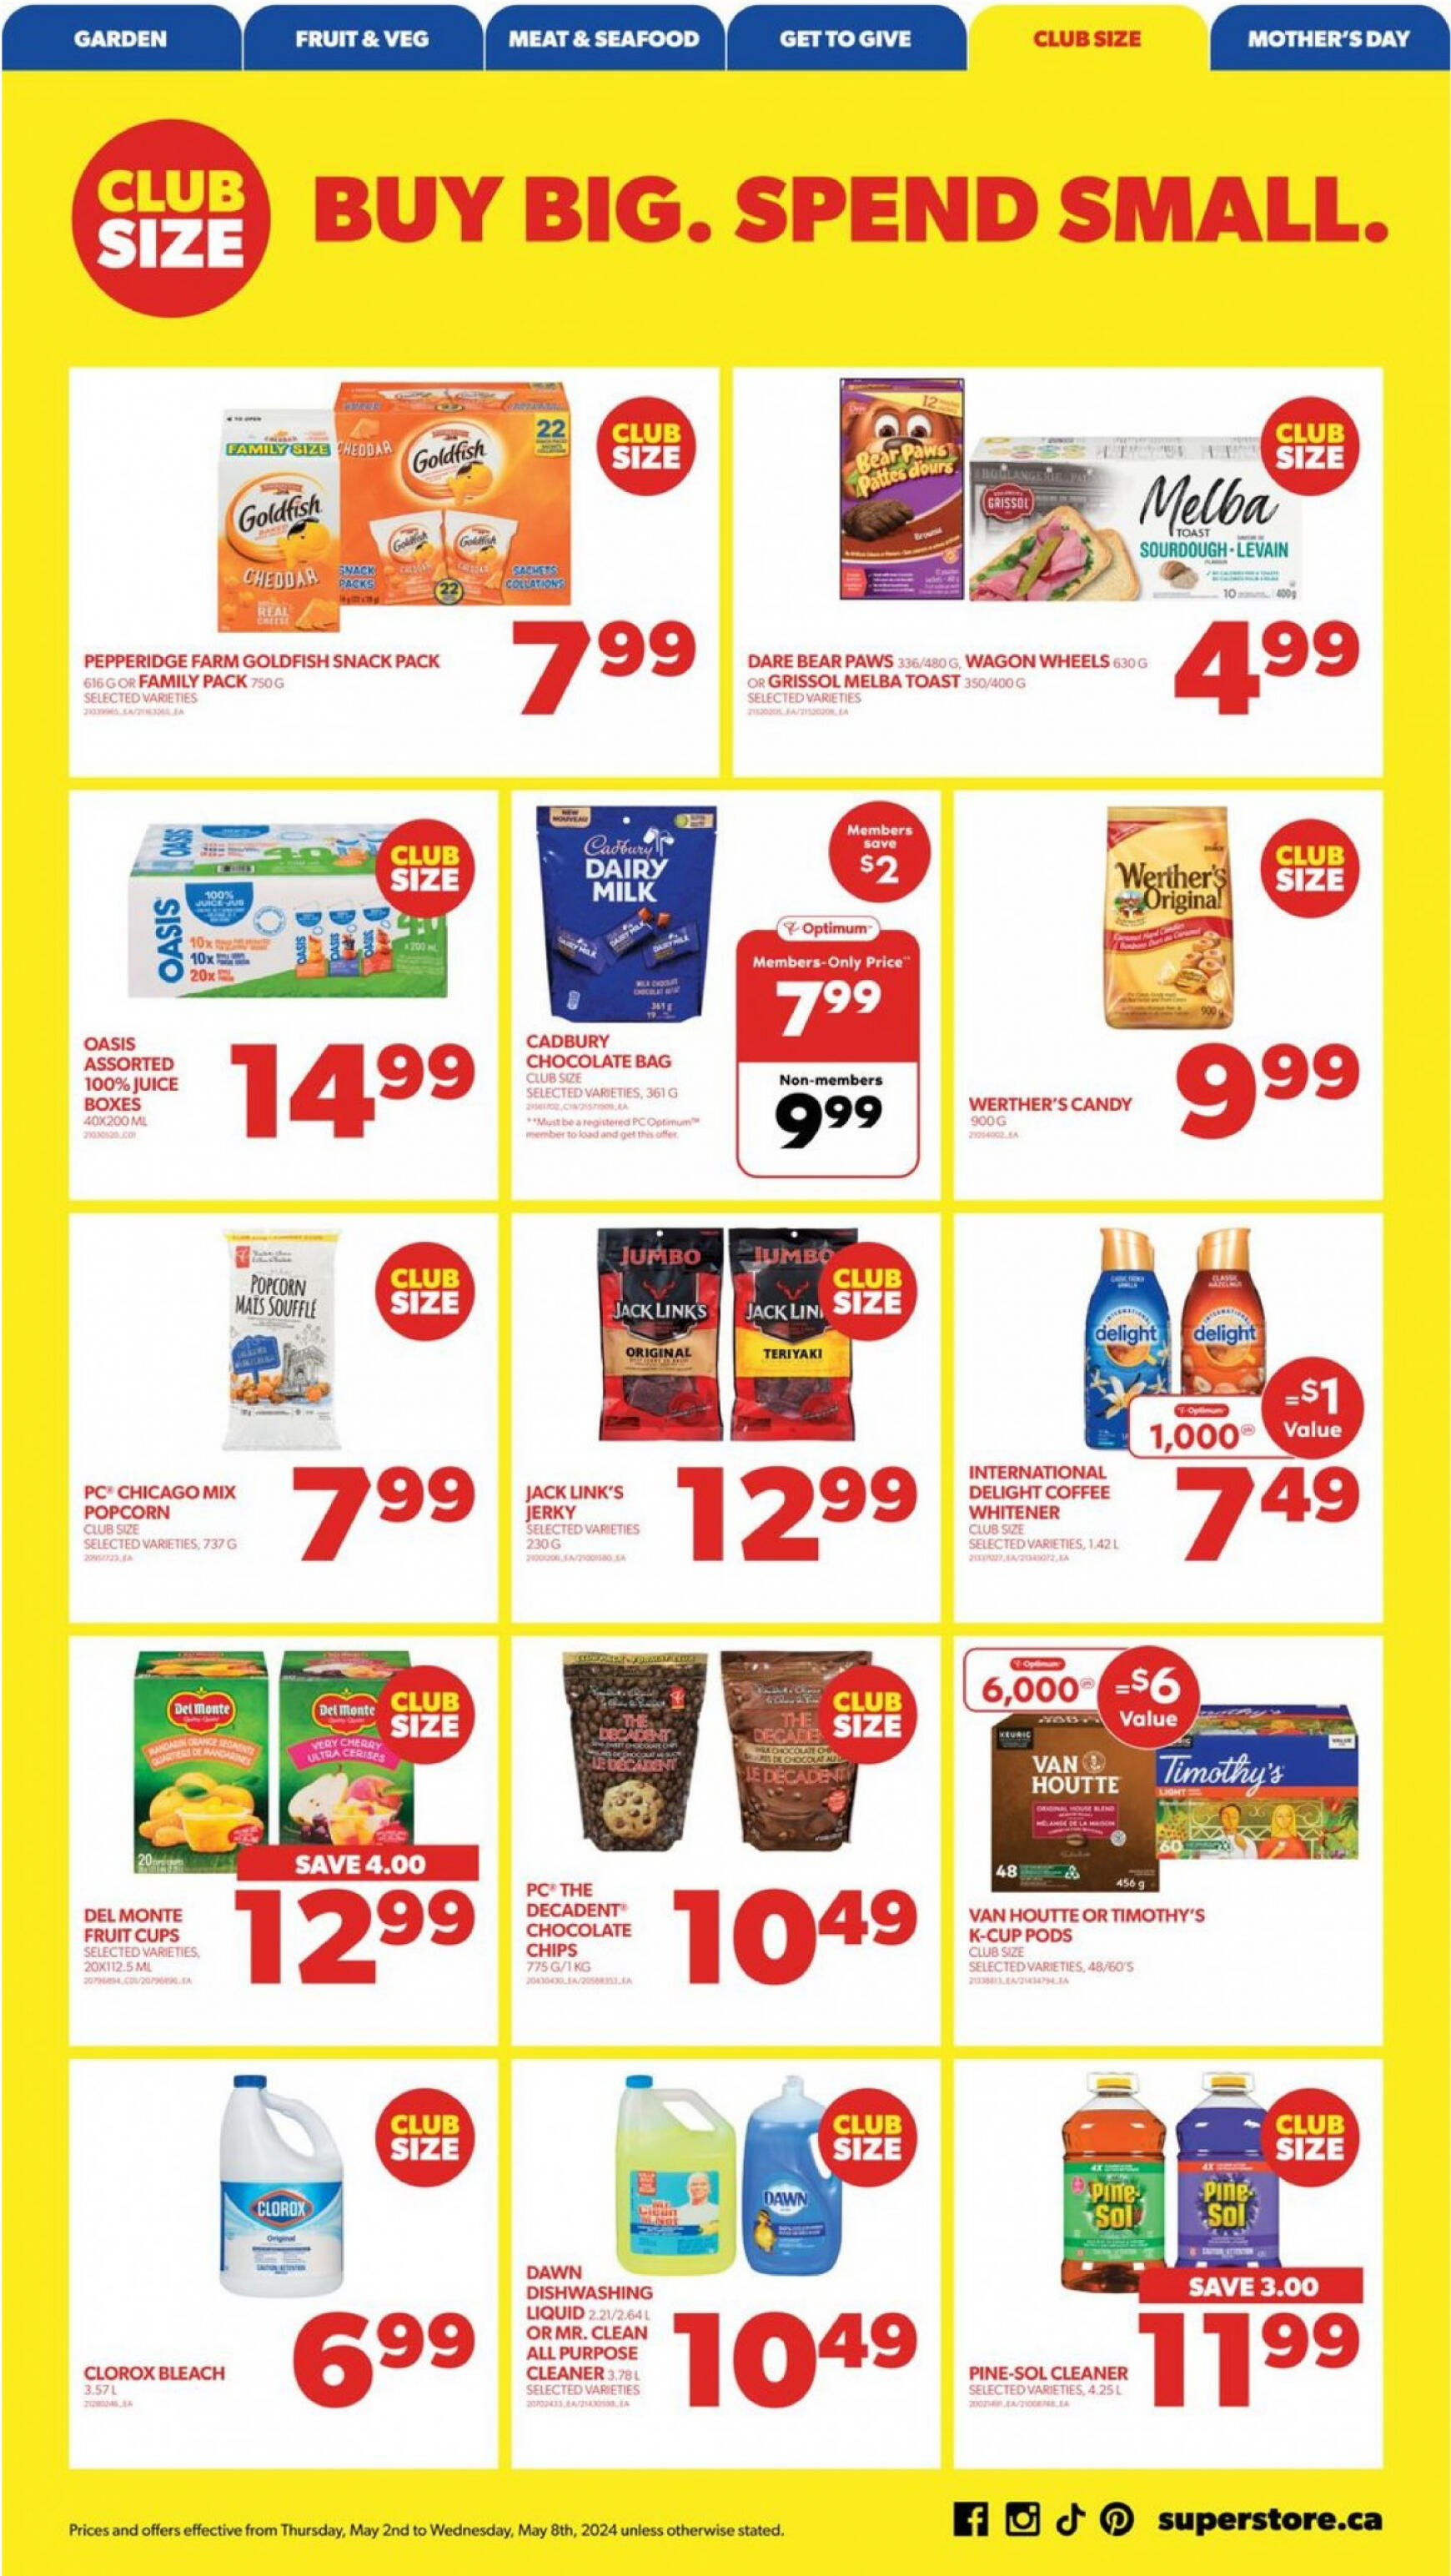 real-canadian-superstore - Real Canadian Superstore flyer current 02.05. - 08.05. - page: 17